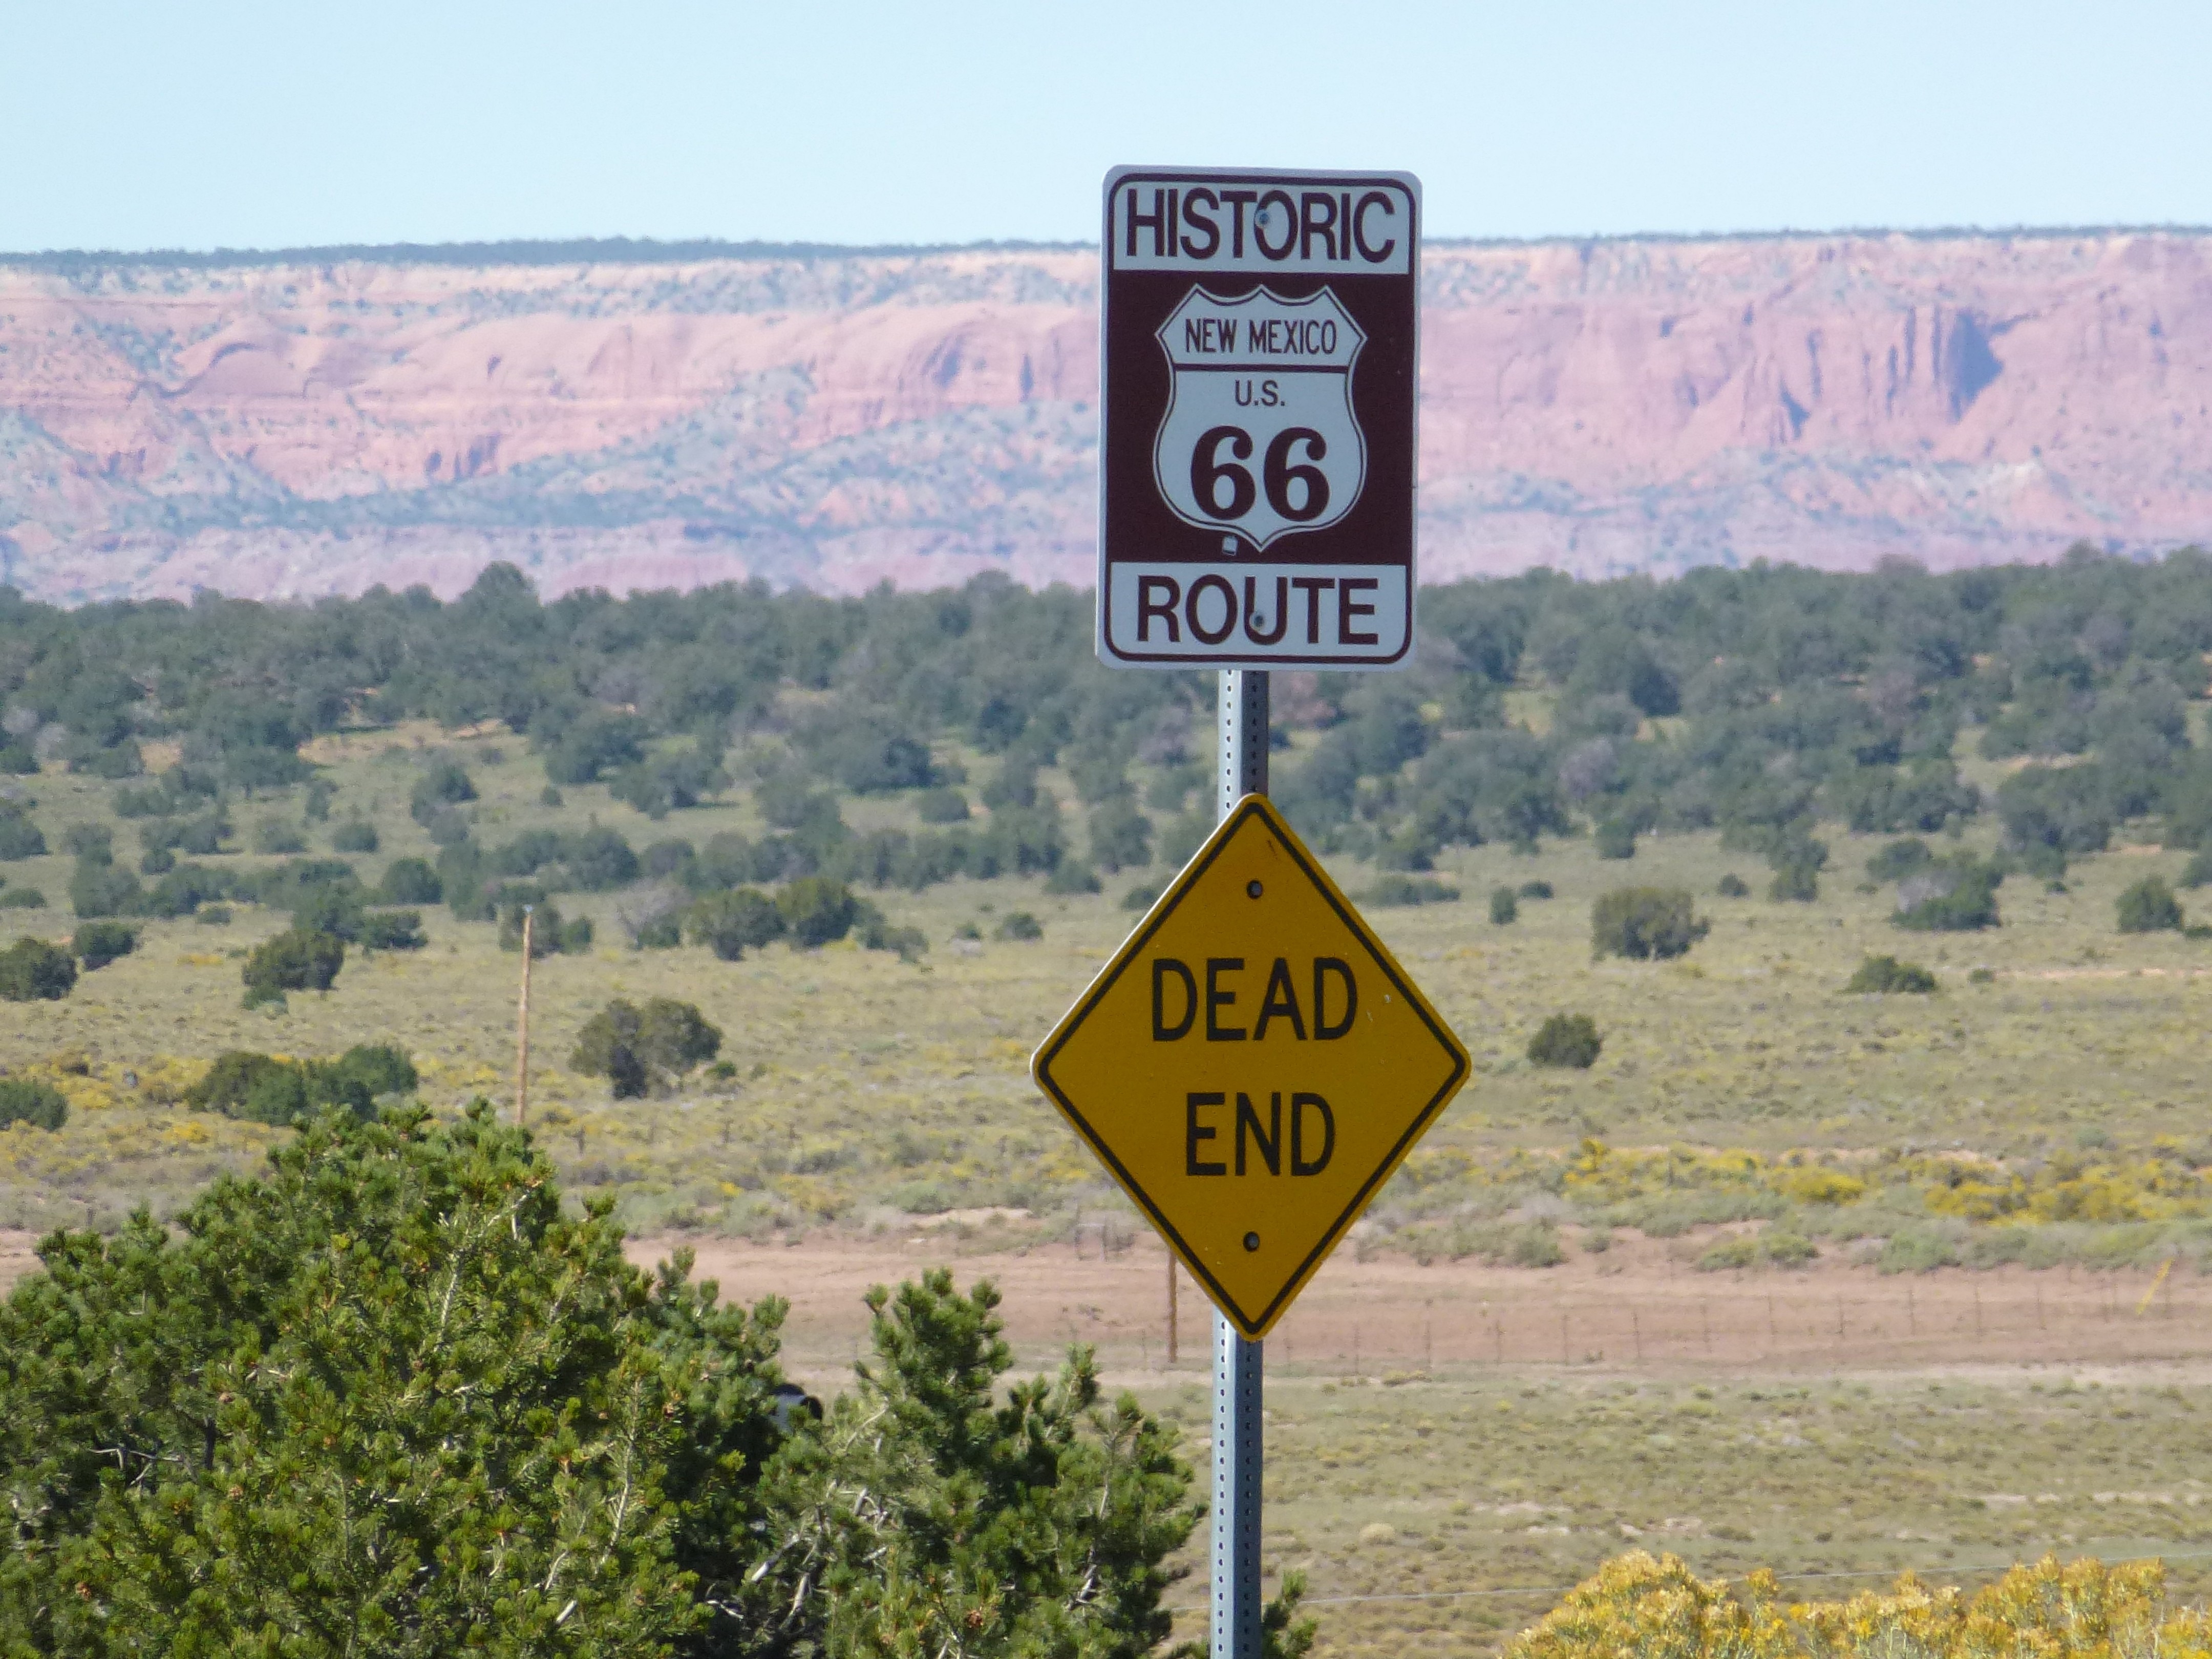 Picture Of The Route 66 Dead End Desert Road Signs Free Image Download